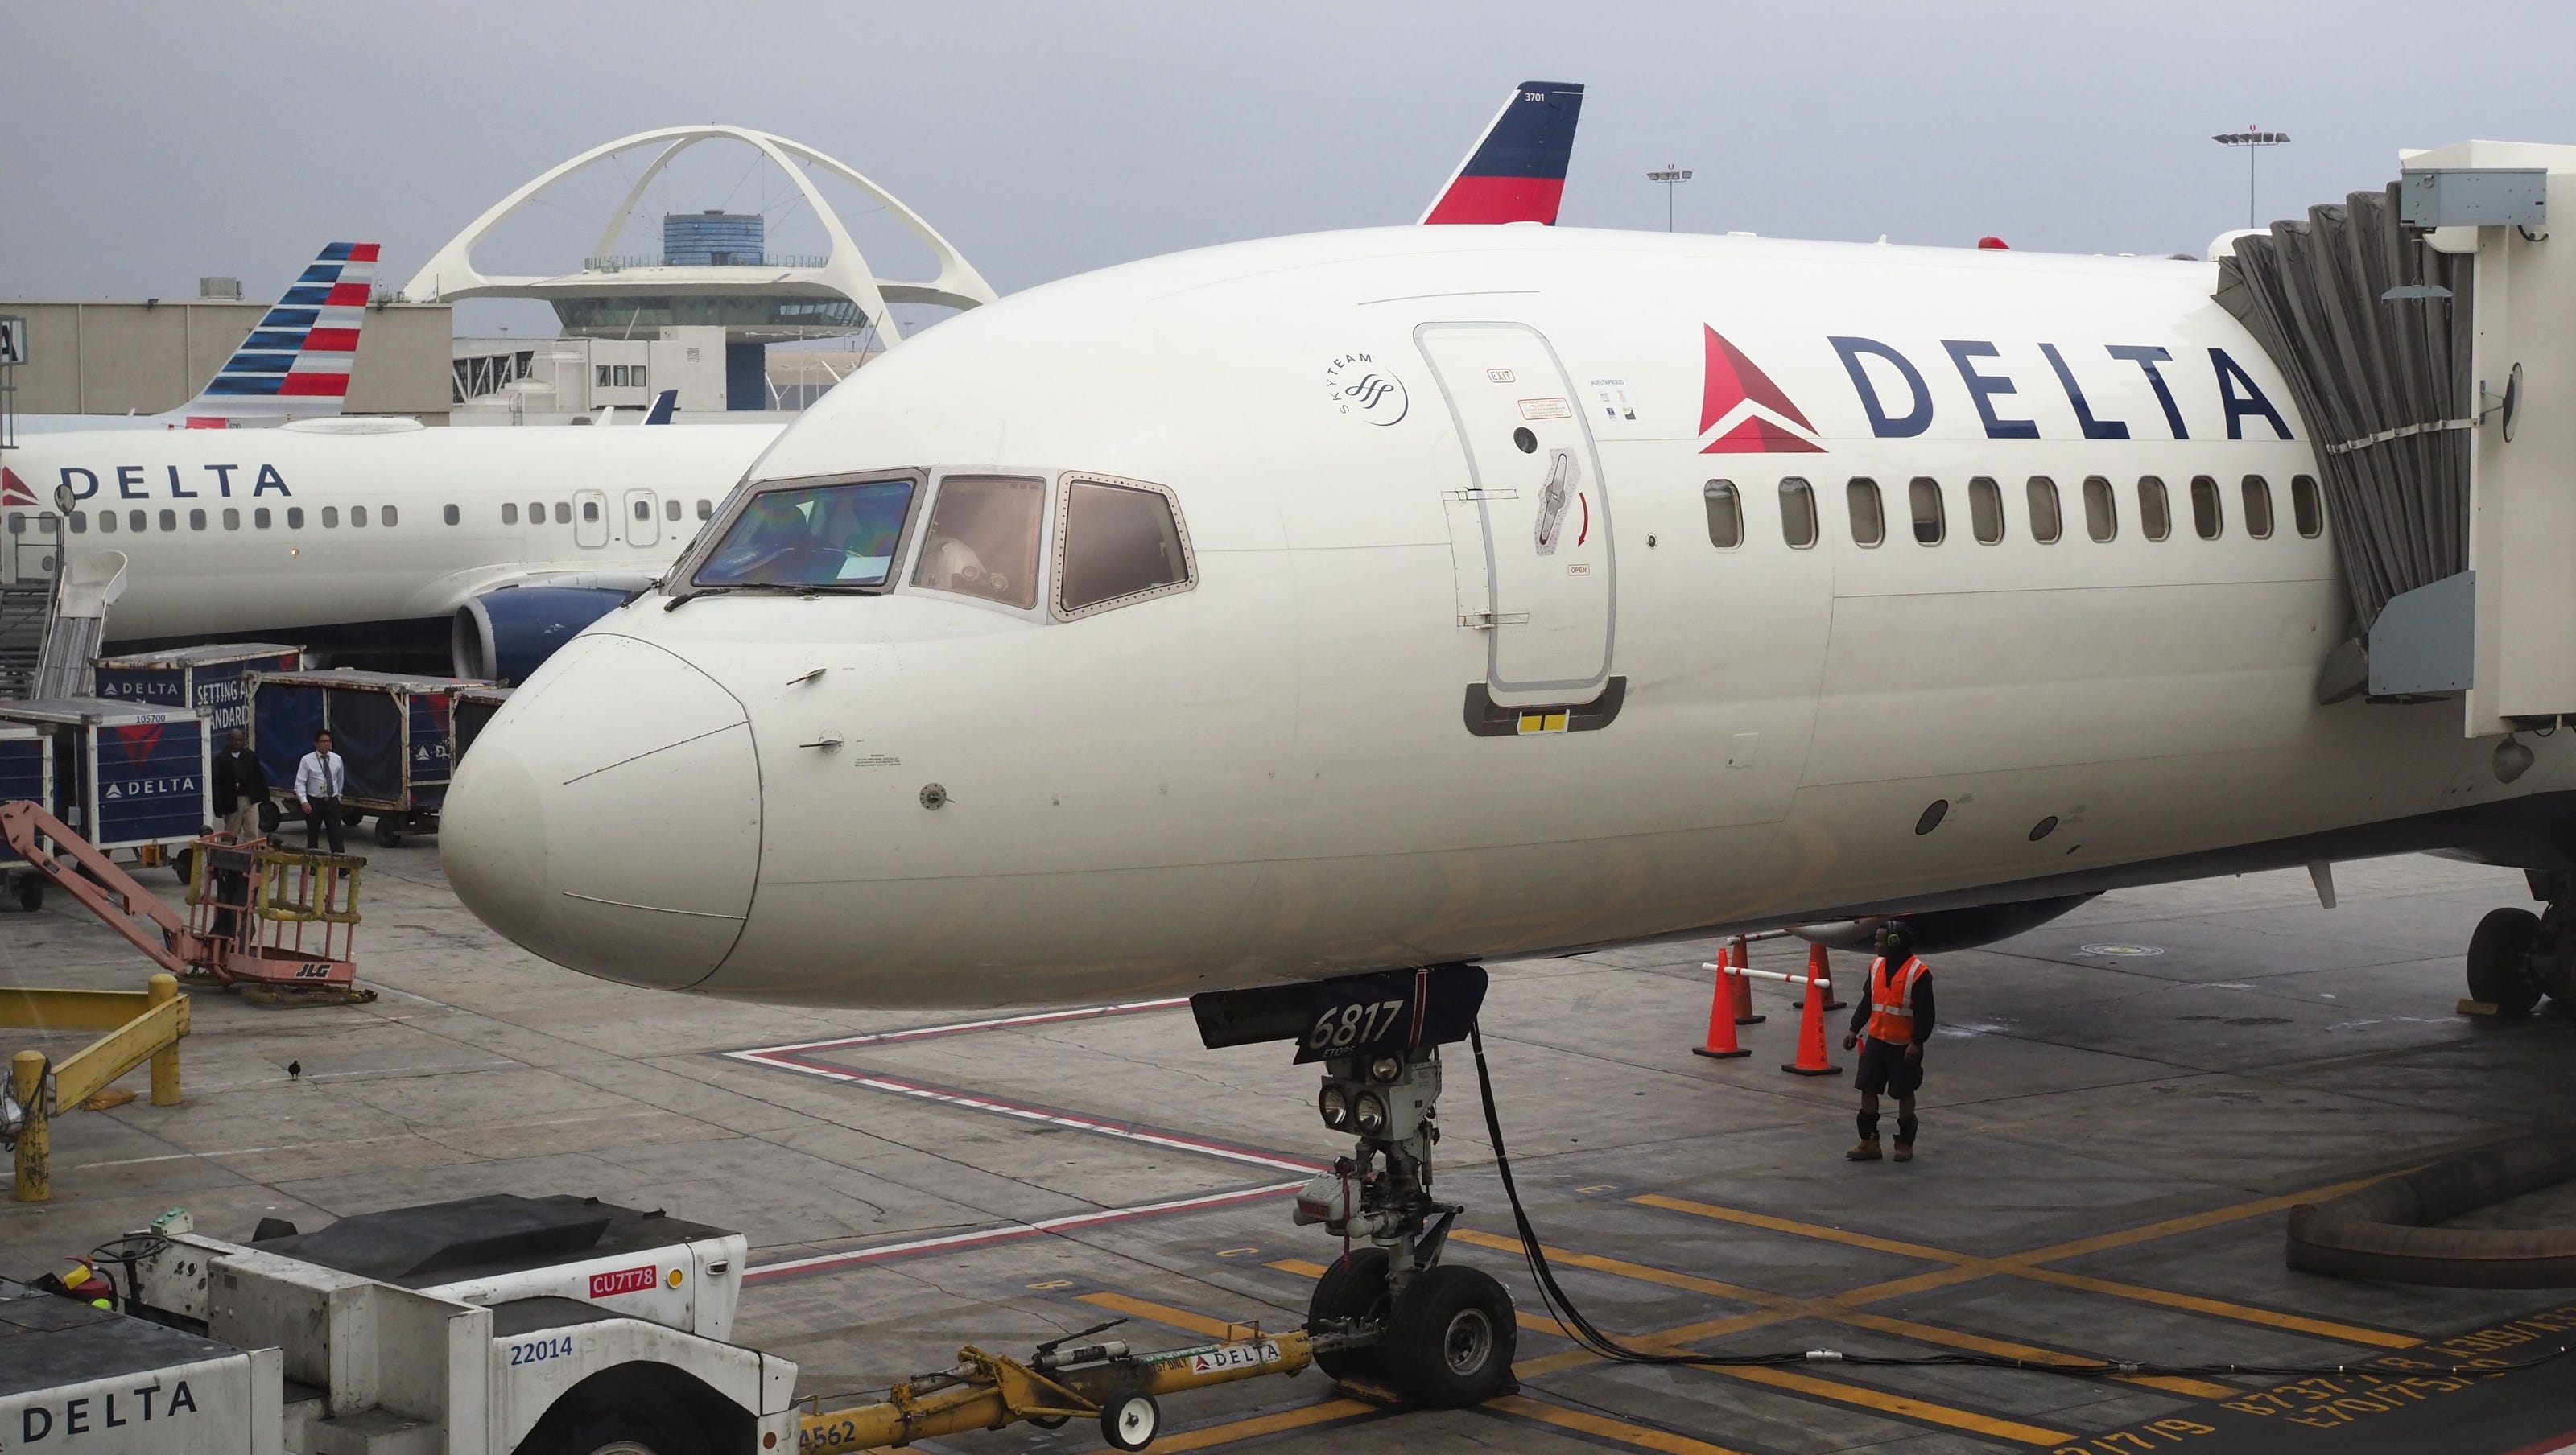 2 Strangers Accused Of Sex On Delta Flight To Detroit Report Says